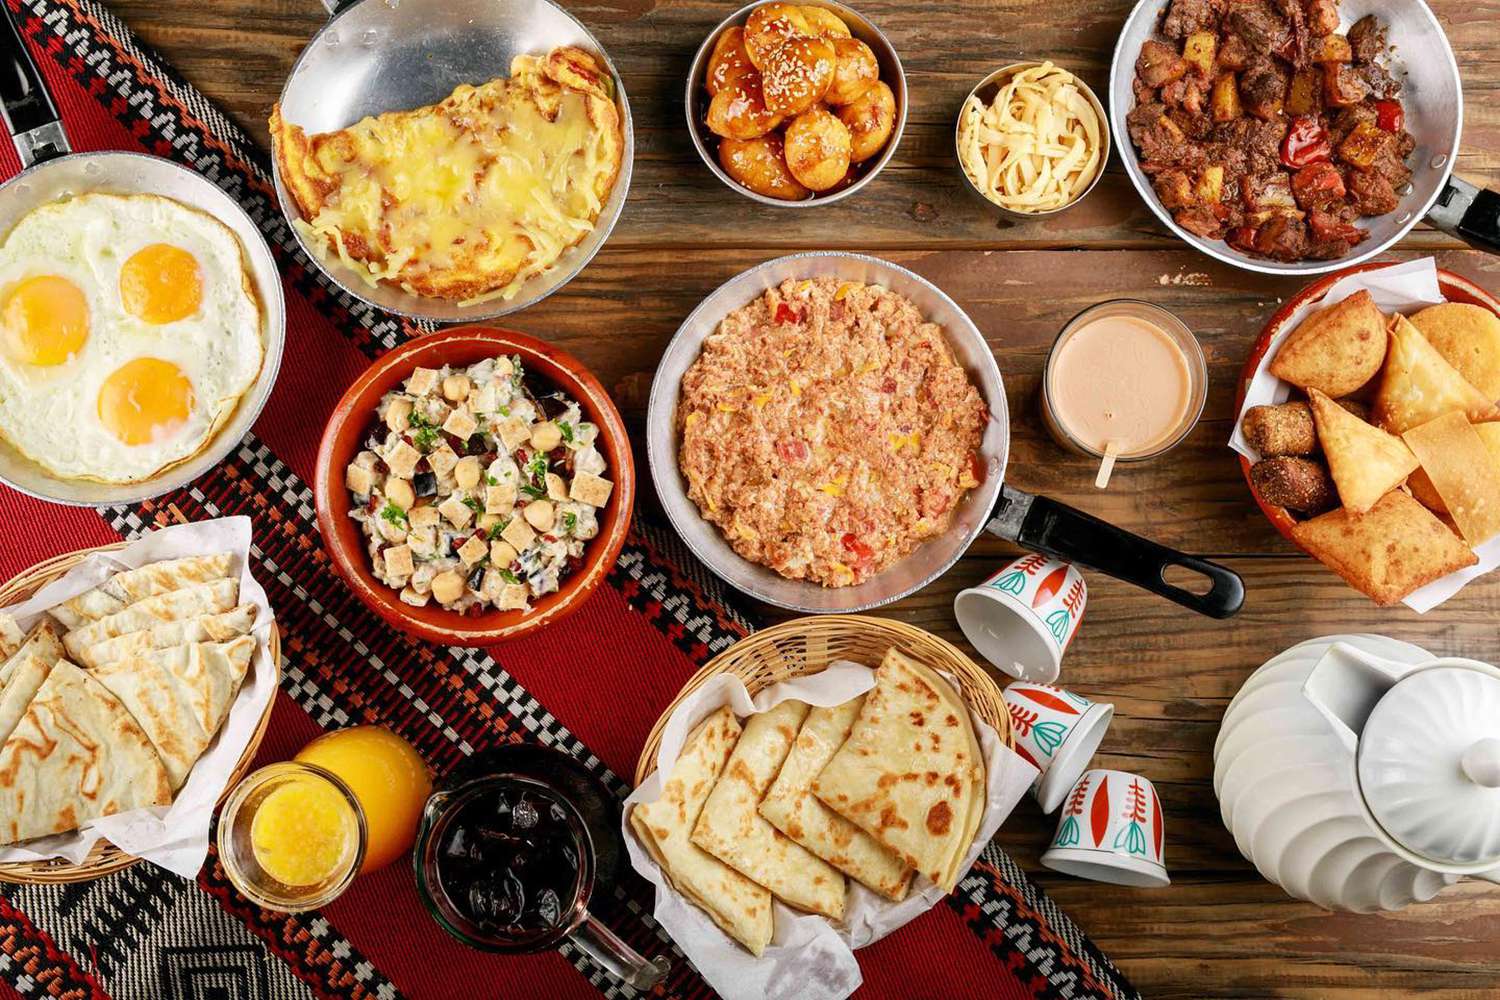 Bahrain’s traditional food: Where to try some of the Kingdom’s best ...